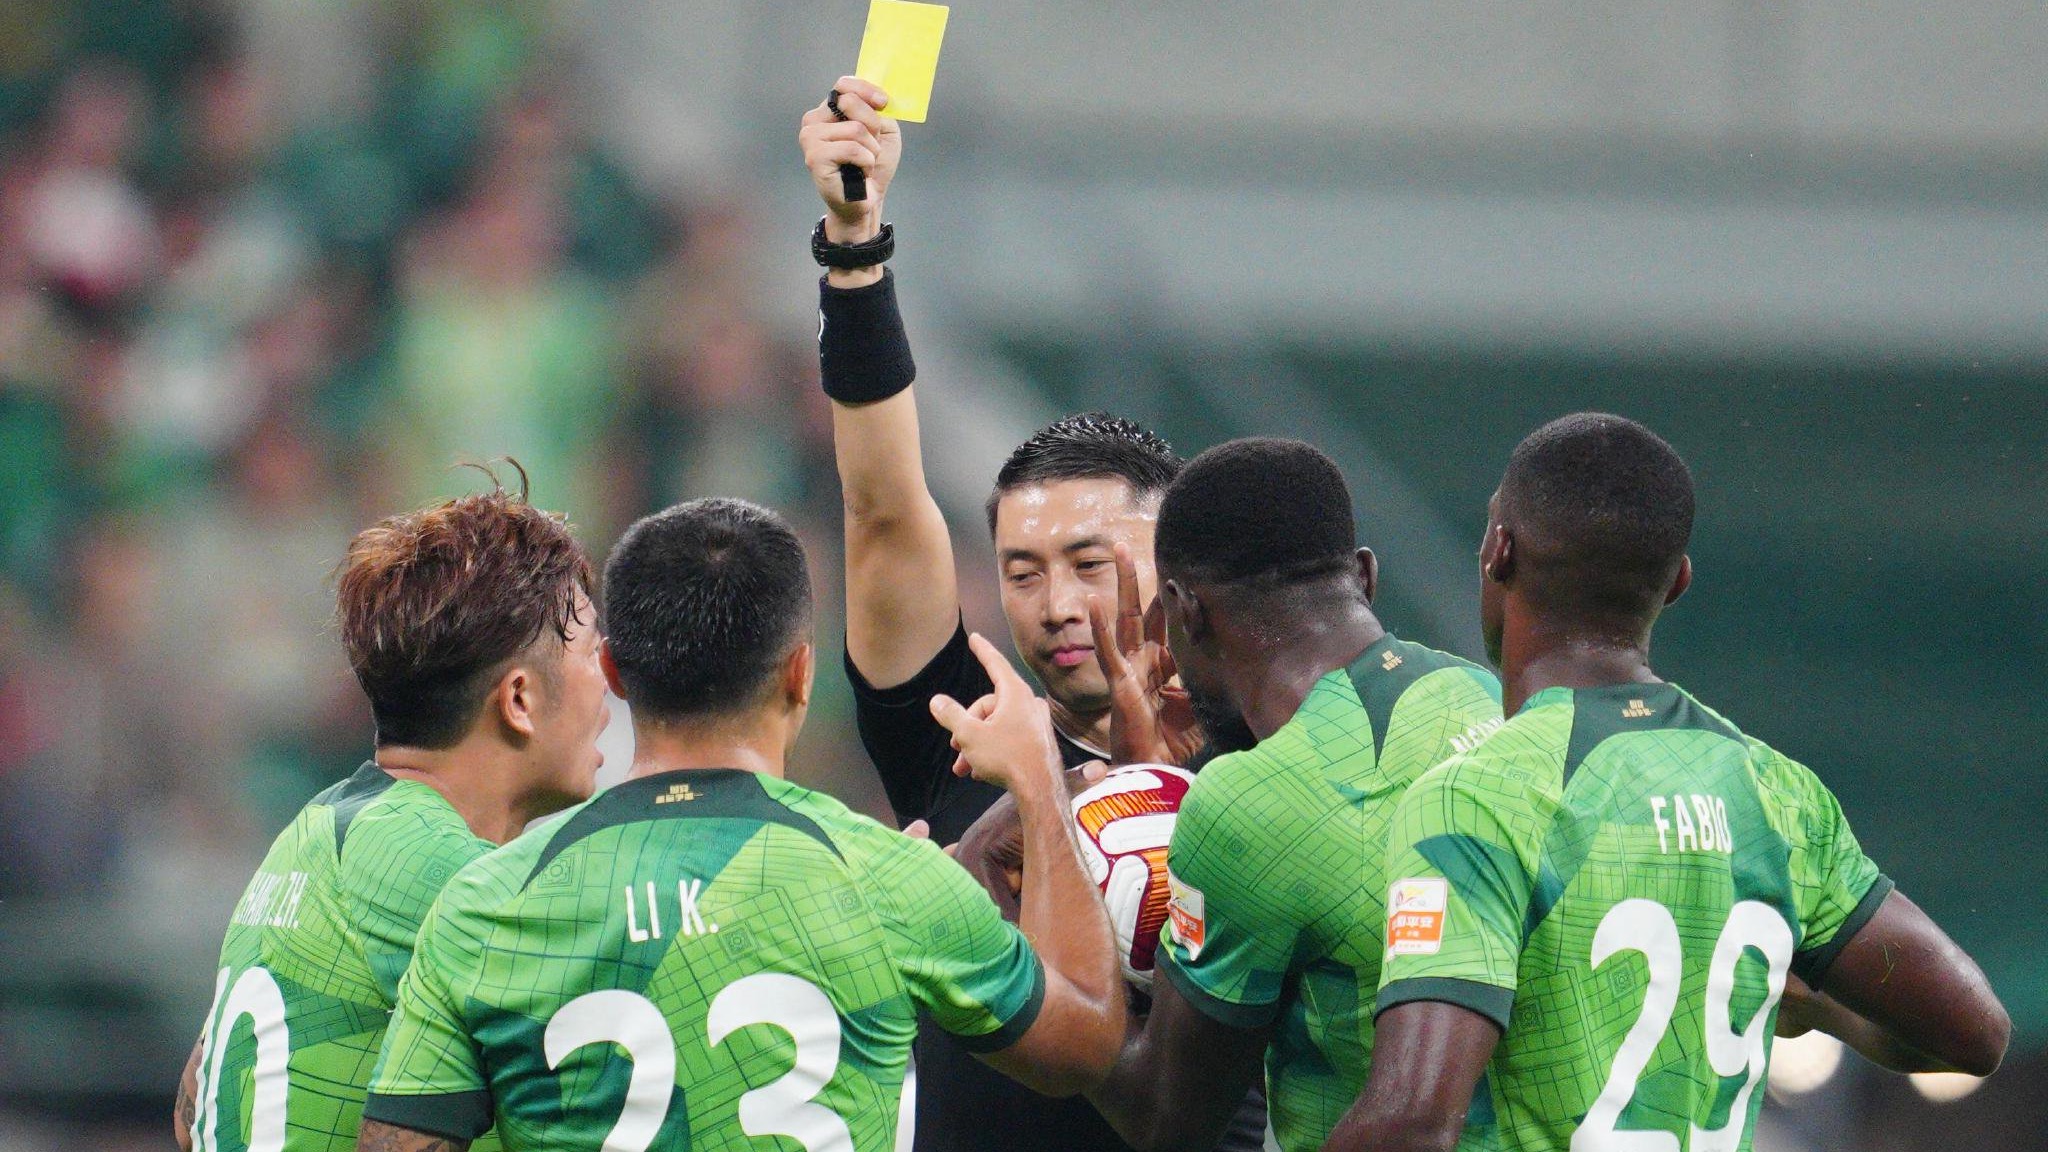 Beijing Guoan players react after the referee shows a yellow card during their Chinese Super League clash with Zhejiang FC at the new Workers' Stadium in Beijing, China, September 15, 2023. /Beijing Guoan